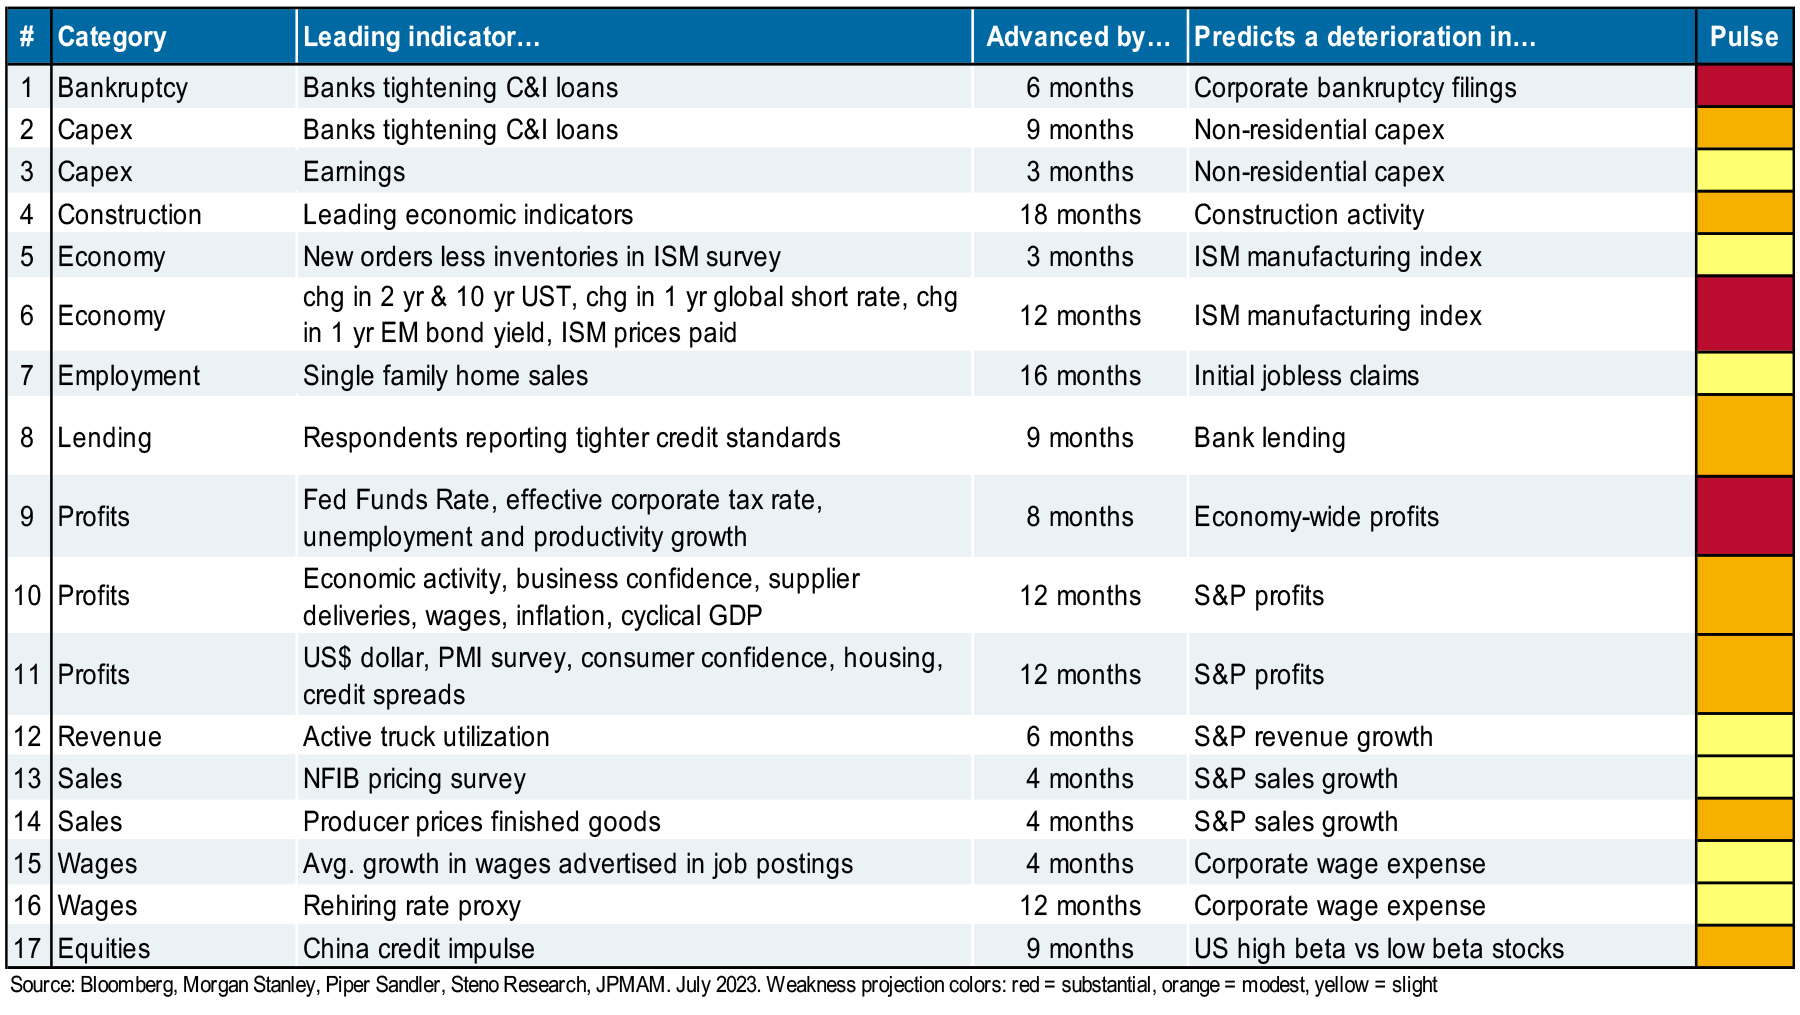 Table of monitored leading indicators.